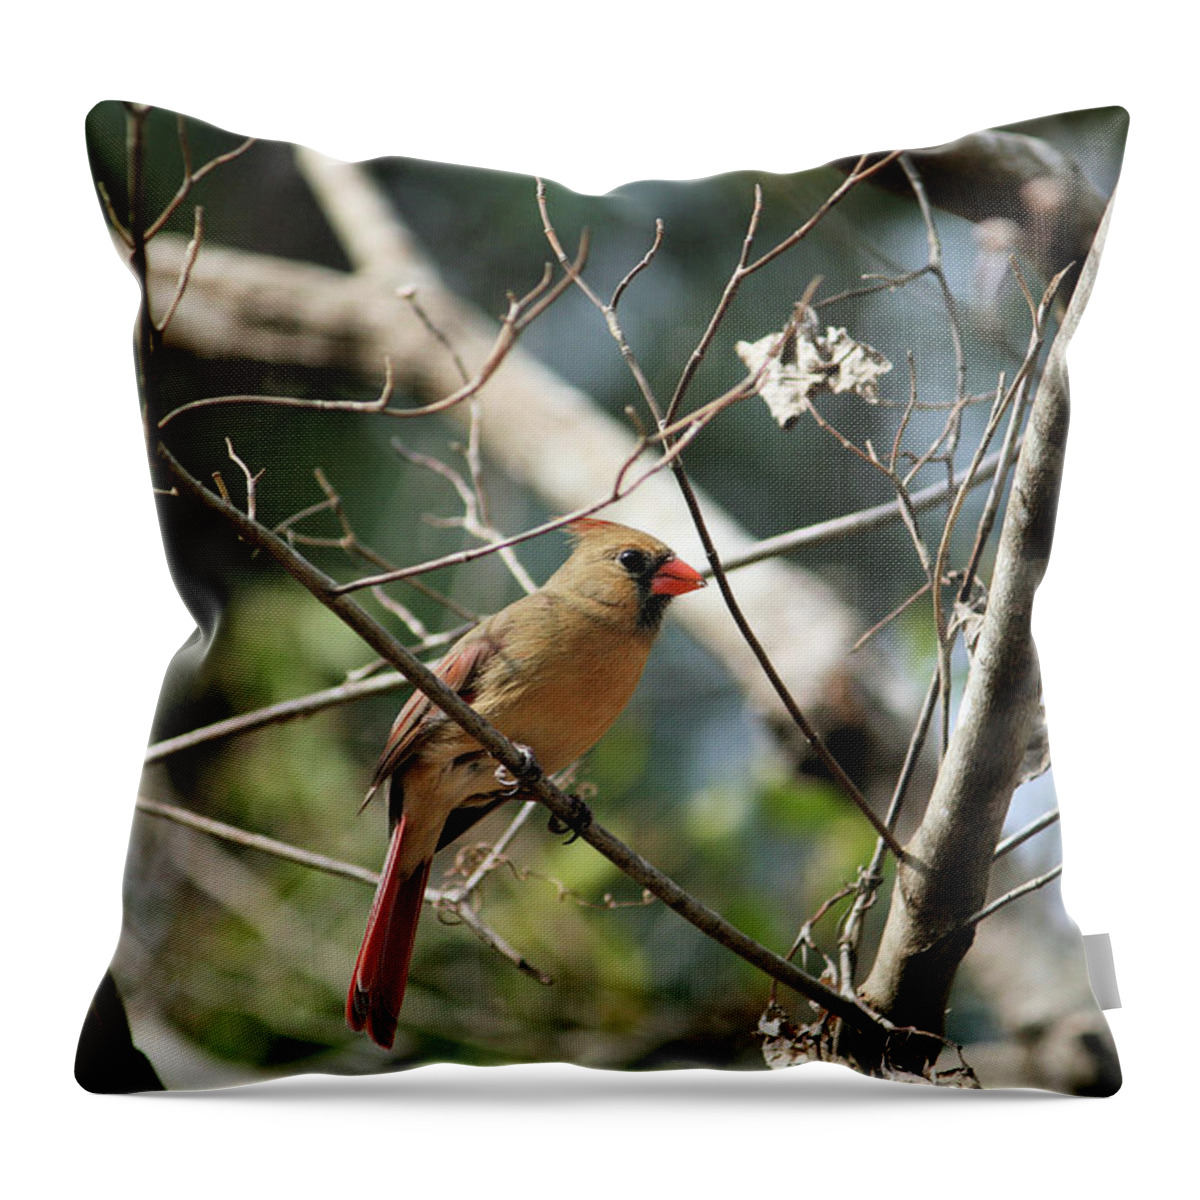 Female Throw Pillow featuring the photograph Female Cardinal by Cathy Harper